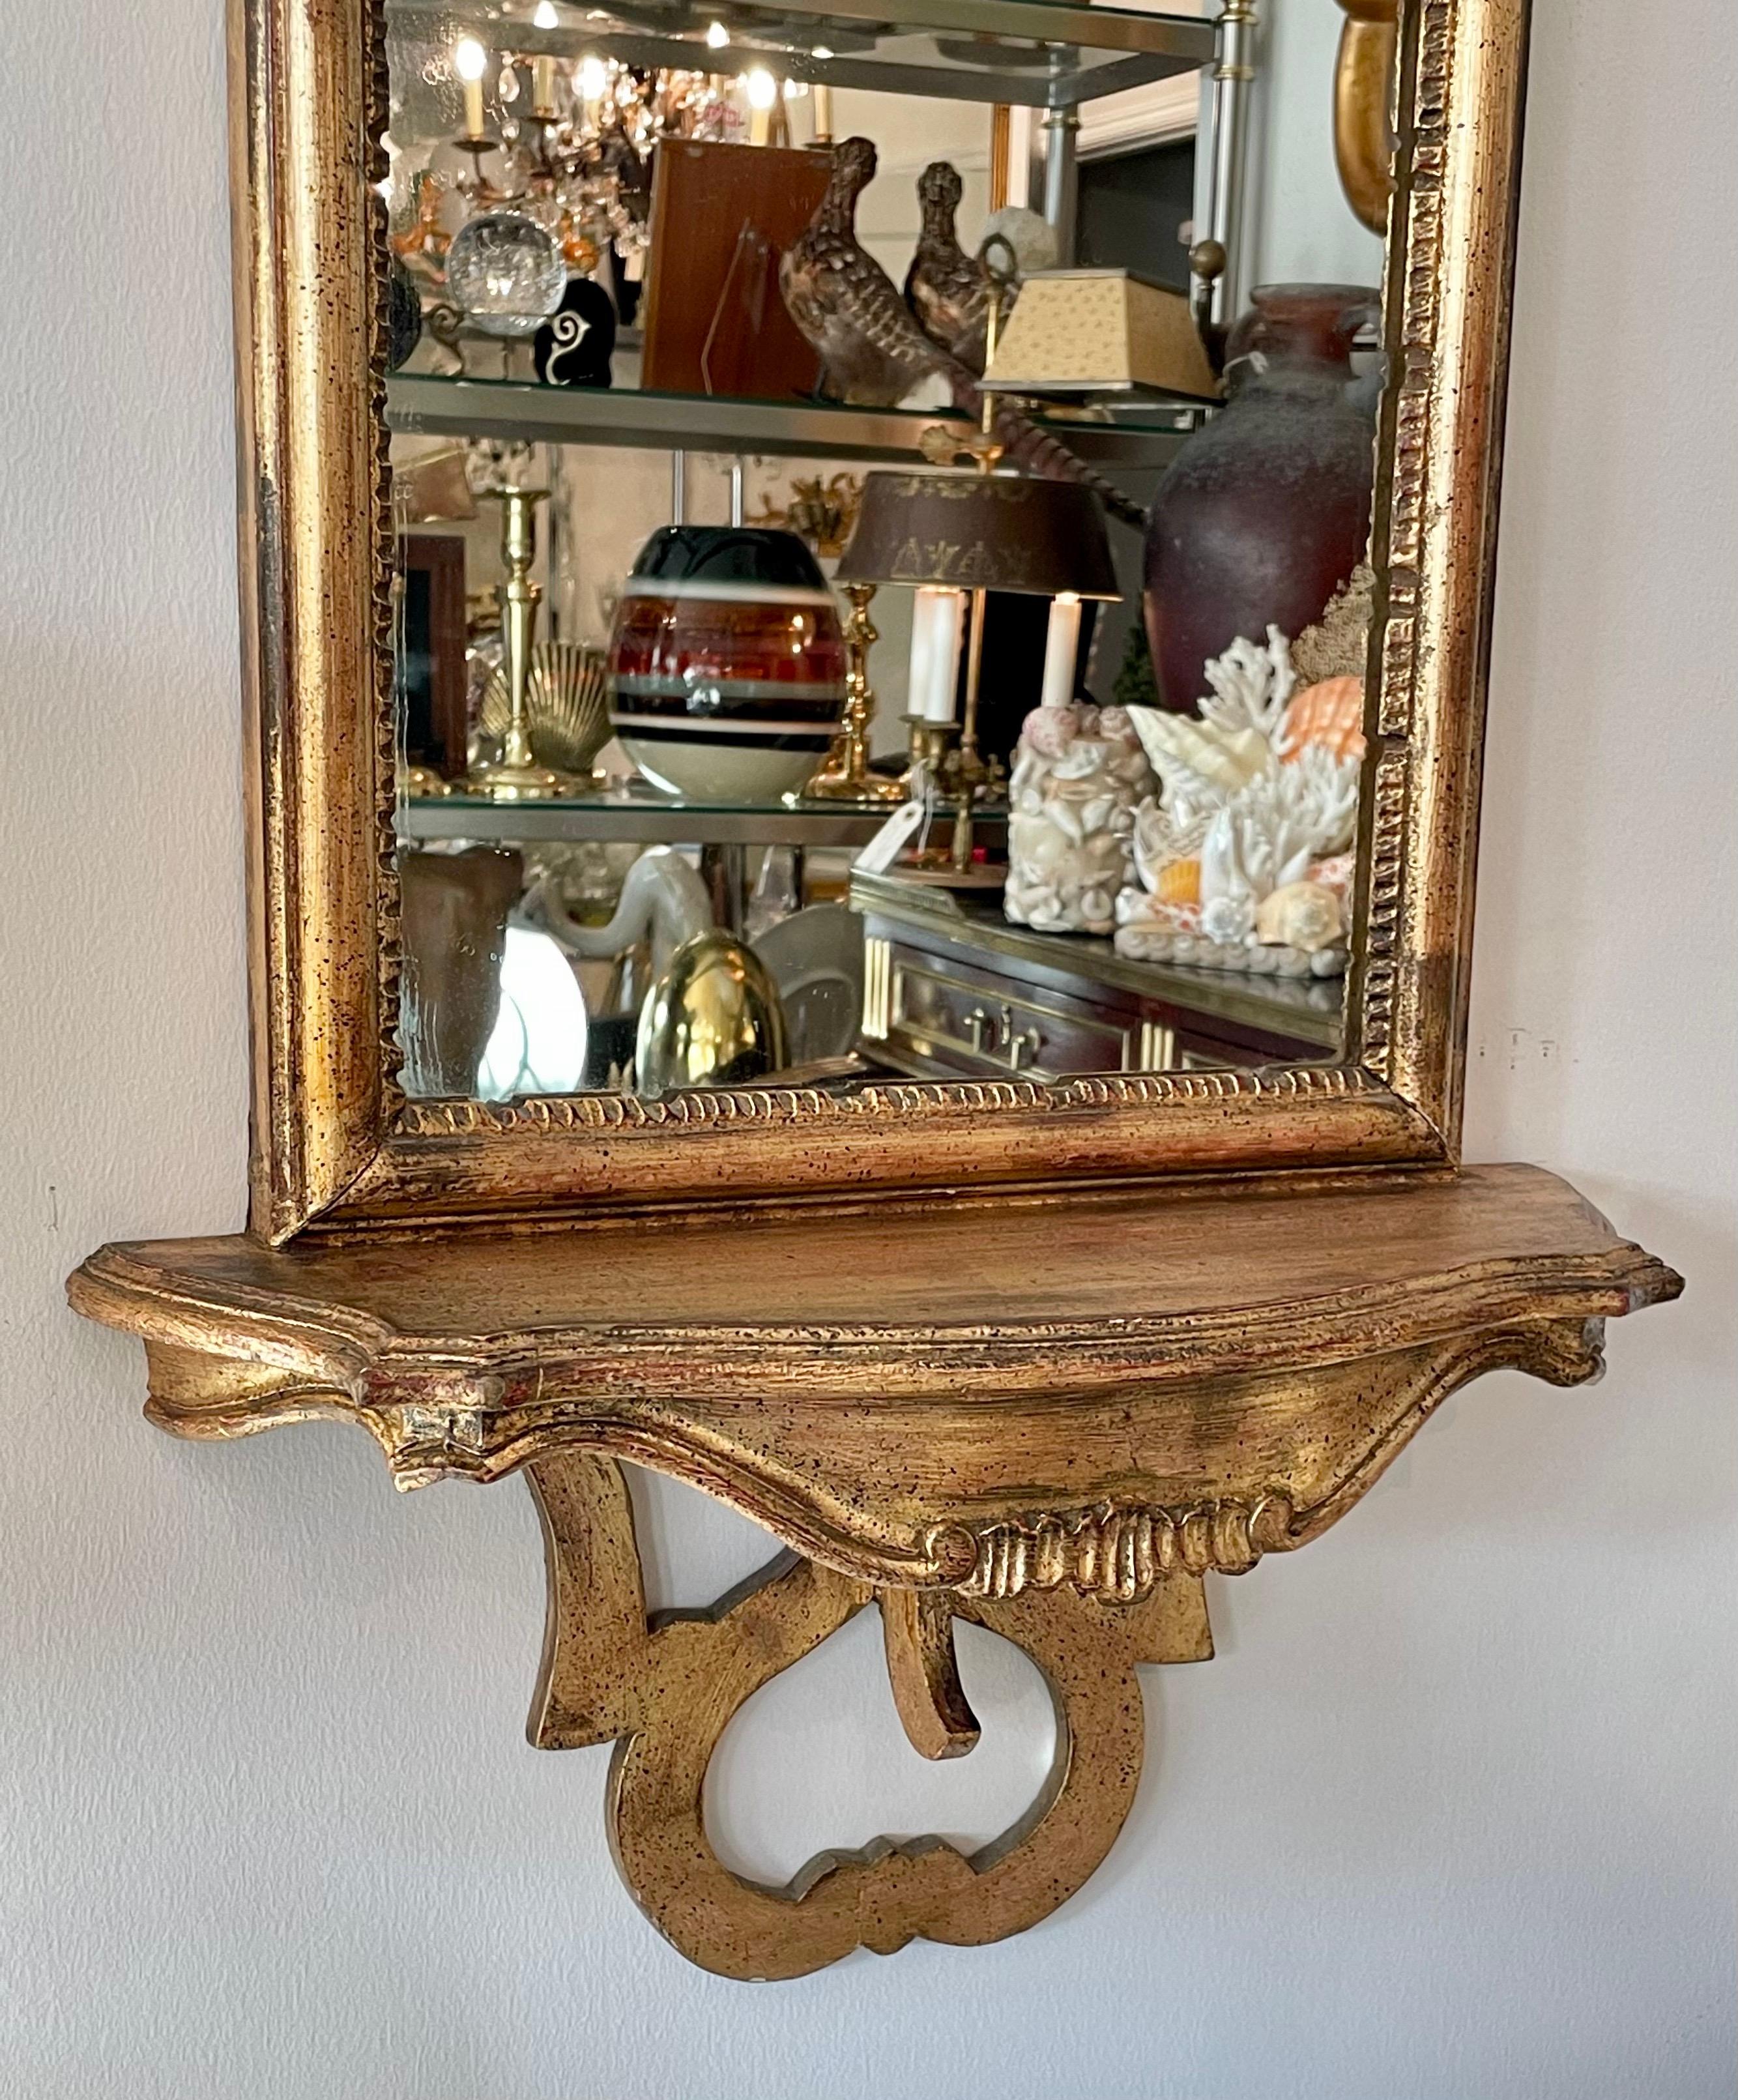 Hand carved & gilded Italian mirror with shelf for display. Very nice carved details.
Simple, yet very elegant.